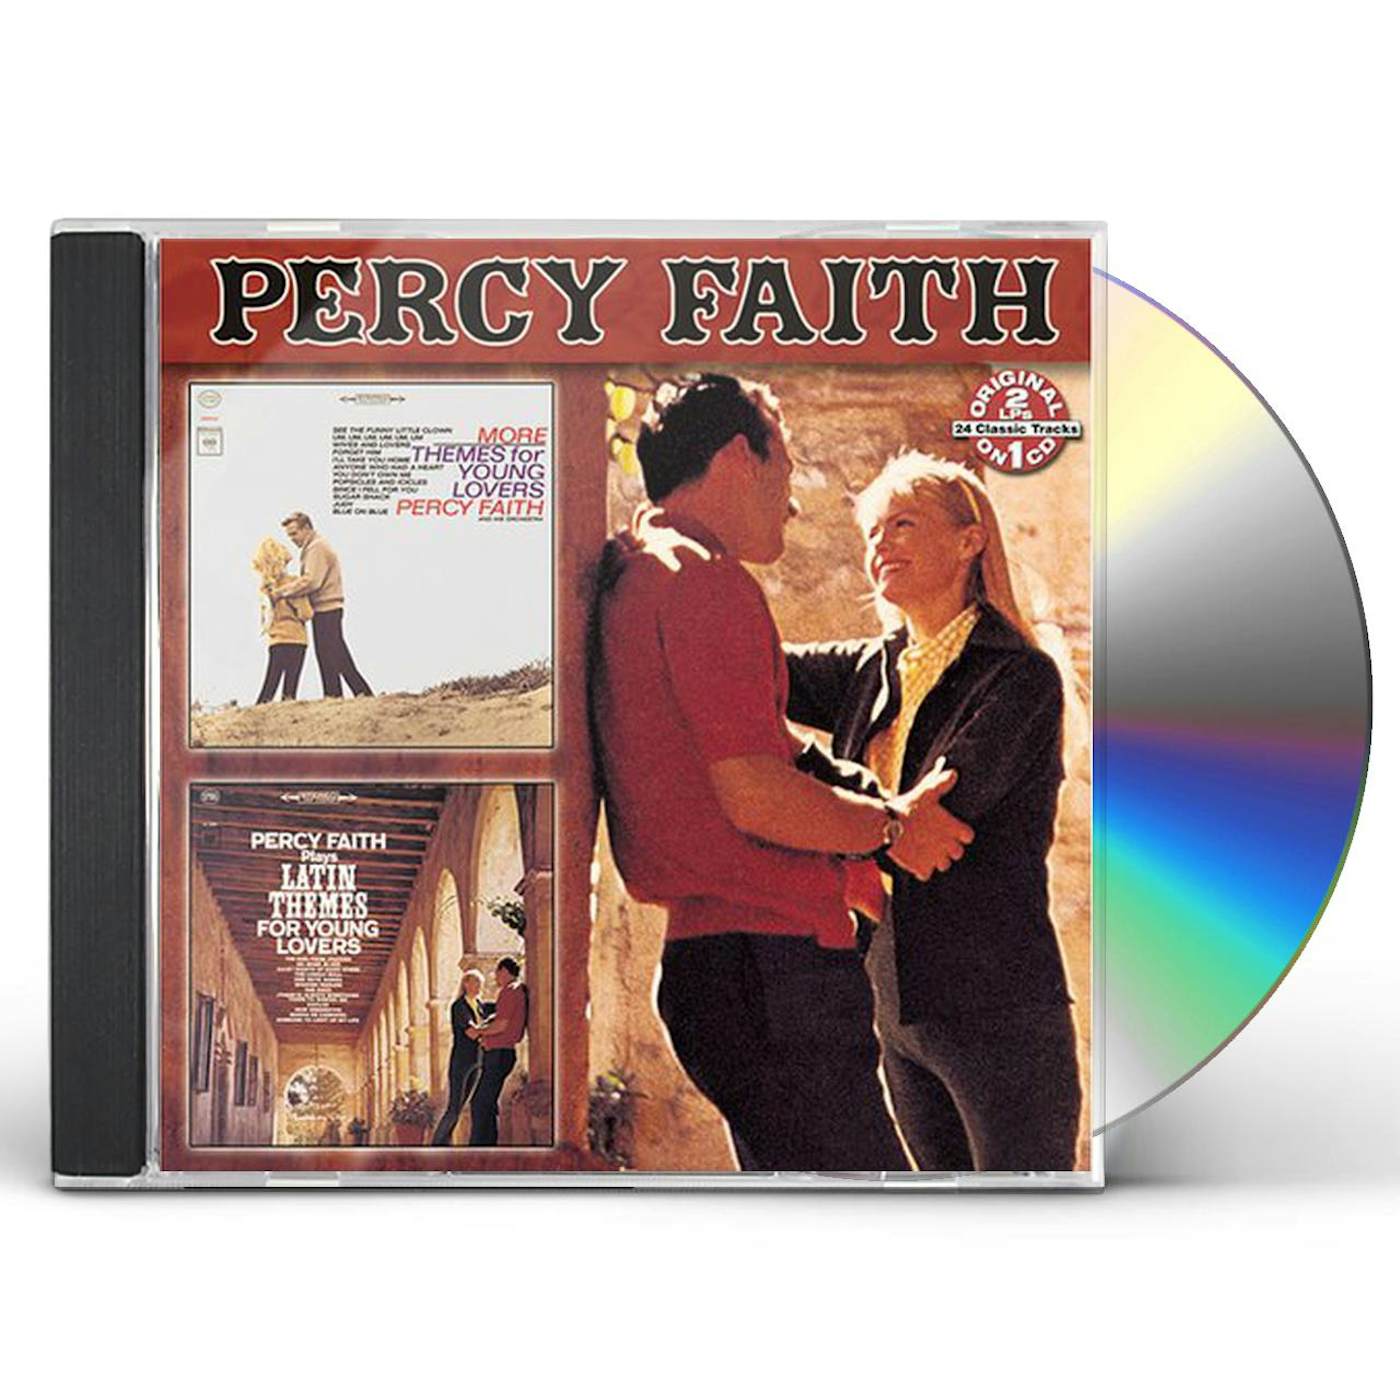 Percy Faith MORE THEMES FOR YOUNG LOVERS / LATIN THEMES FOR CD